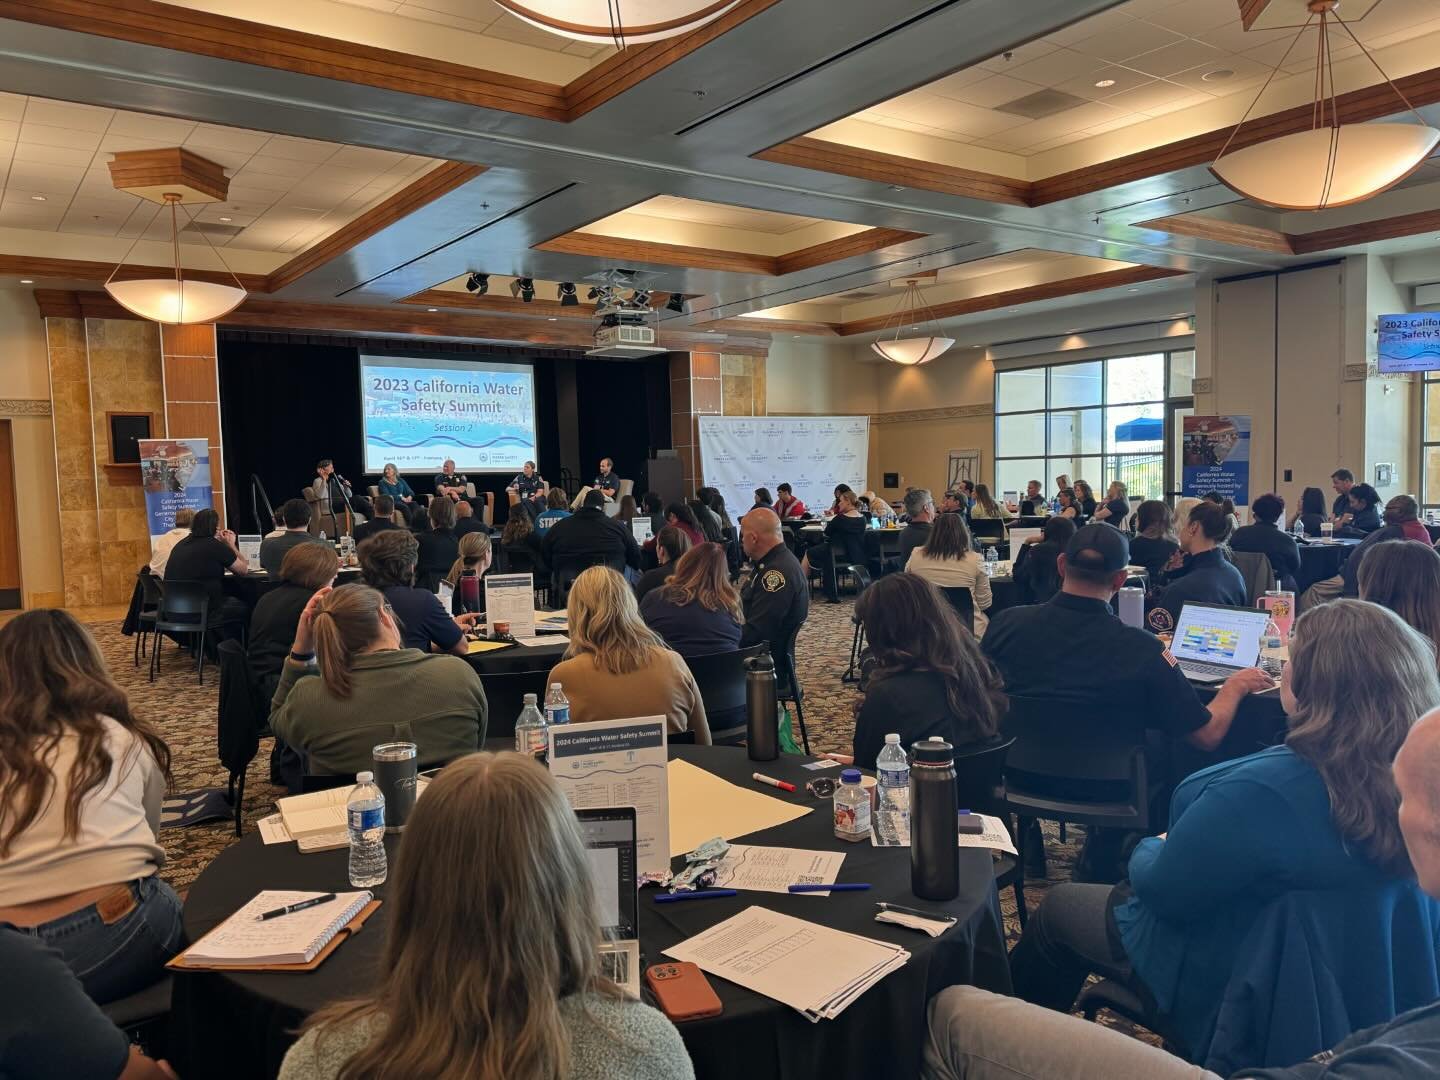 Day one complete for the California Water Safety Summit! Kicking off day two soon with more outstanding subject matter experts and speakers. #drowningprevention